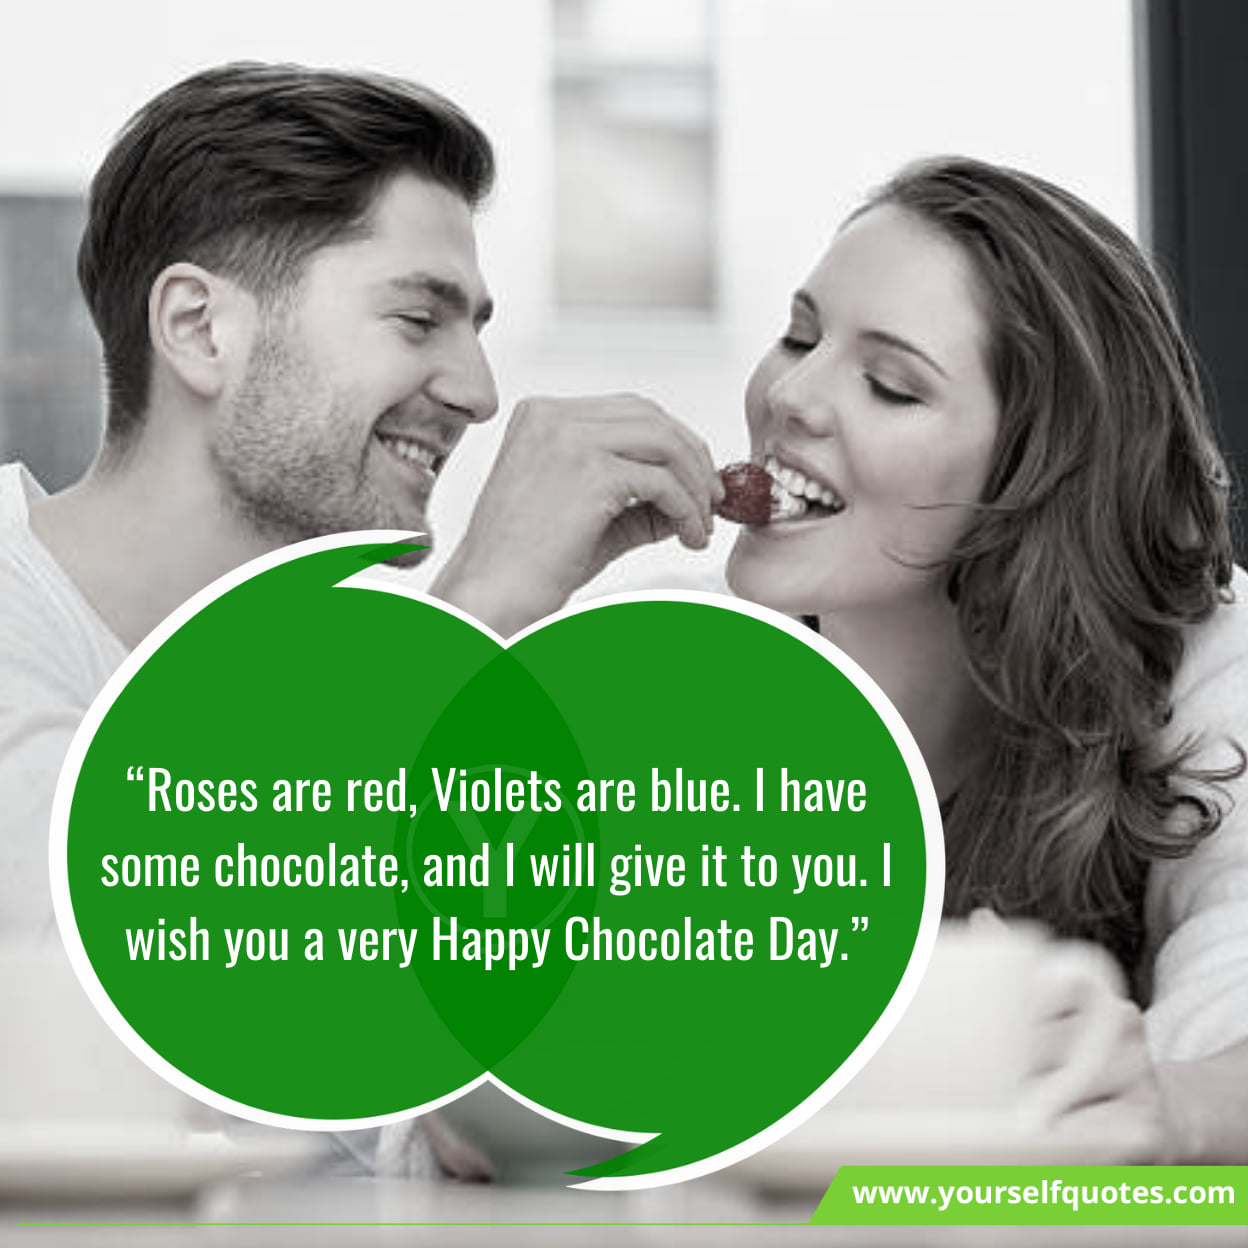 Chocolate Day Messages & Sayings